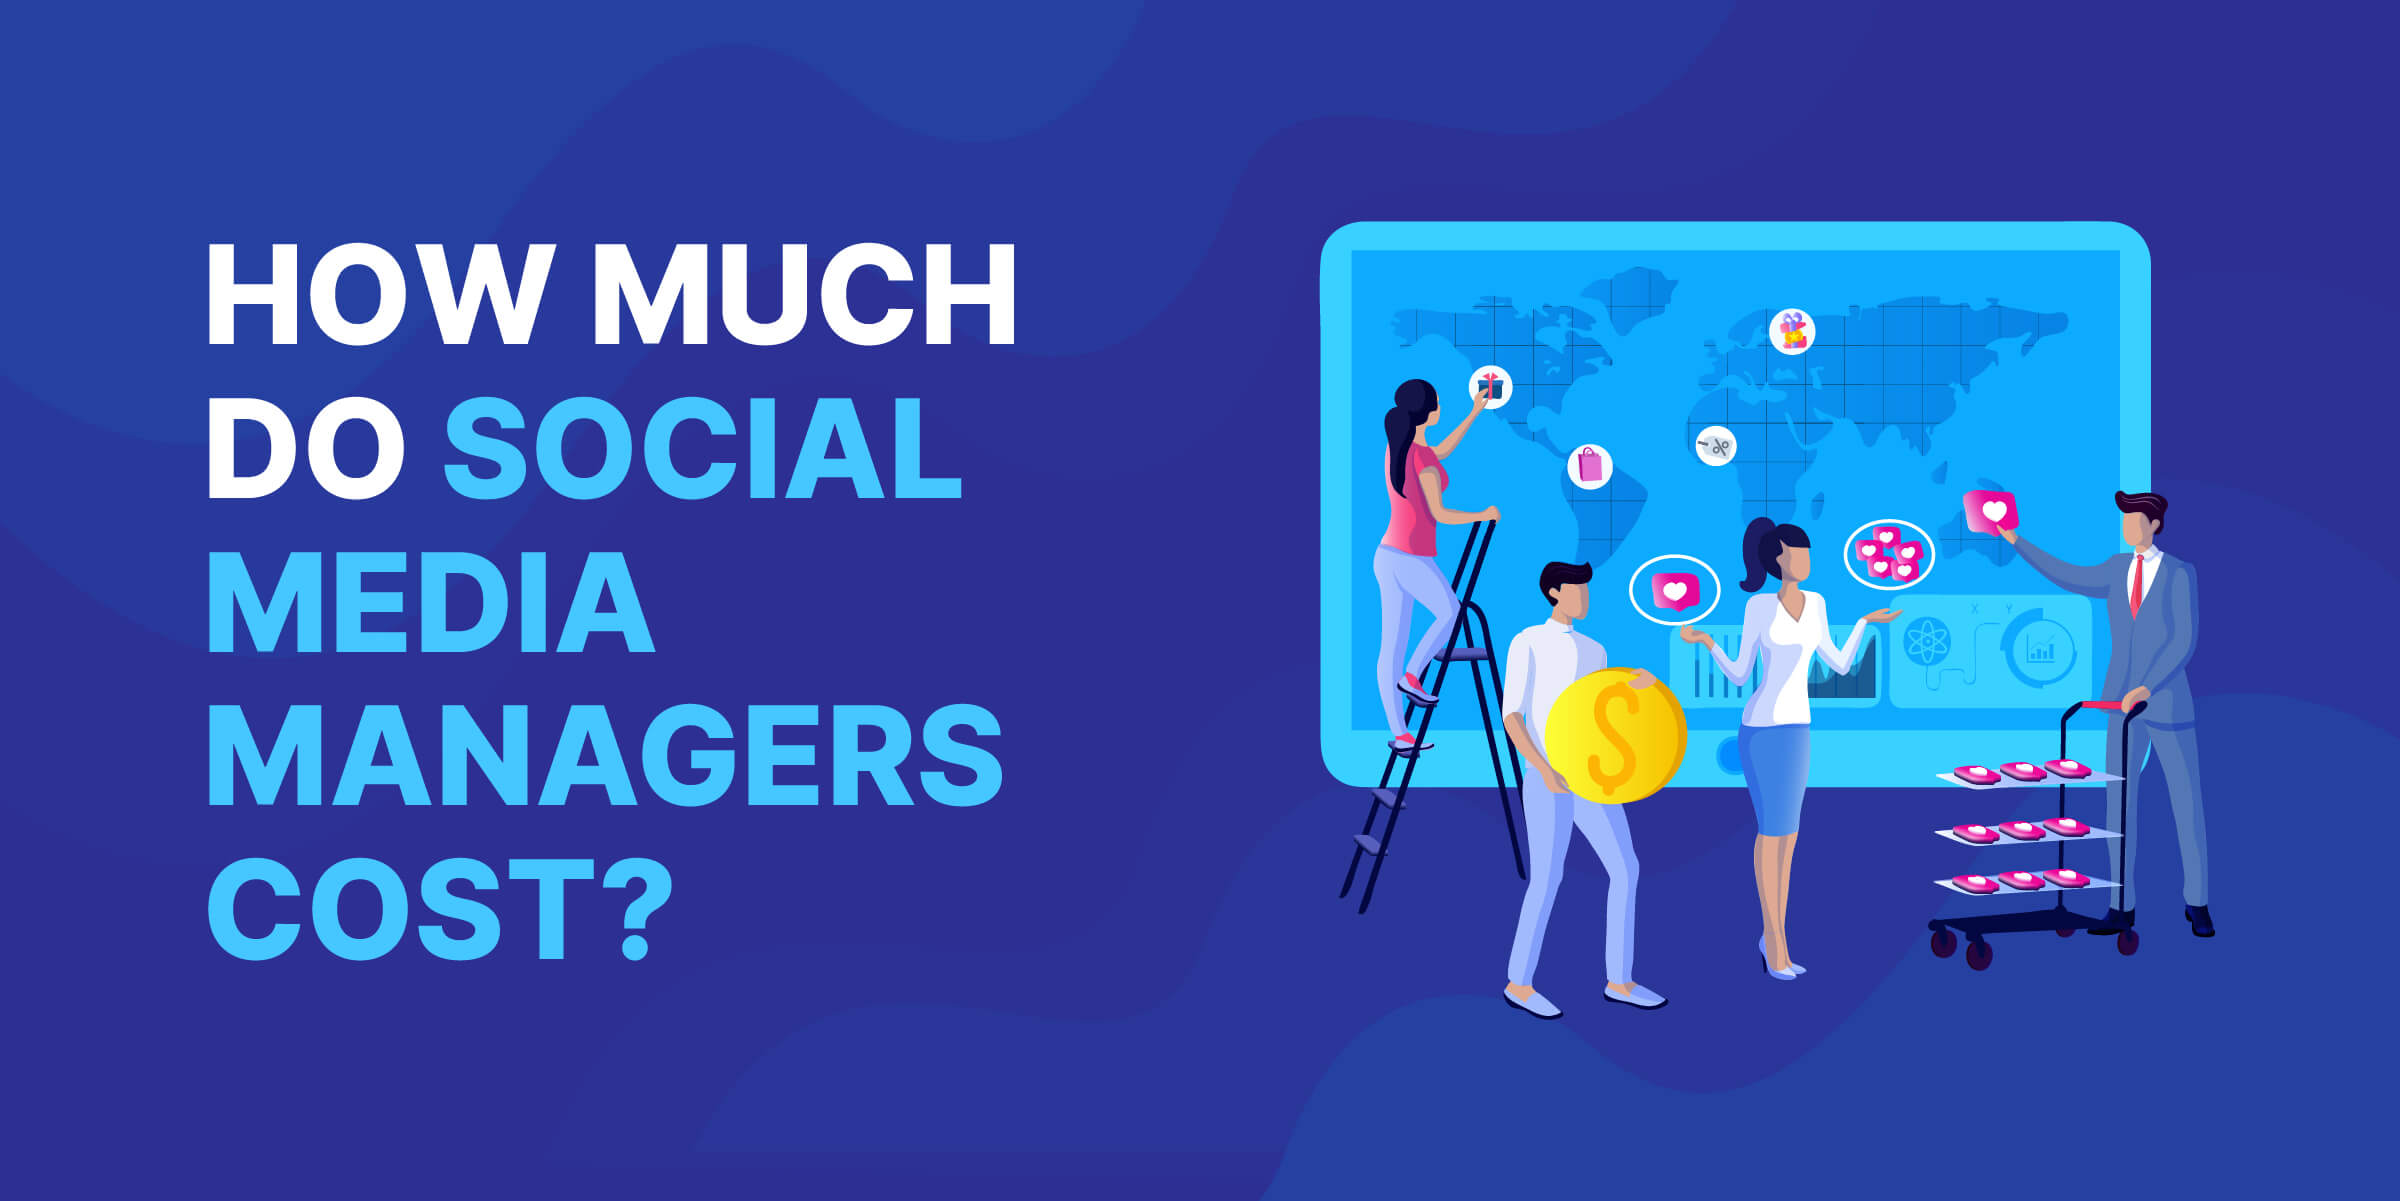 How Much Do Social Media Managers Cost